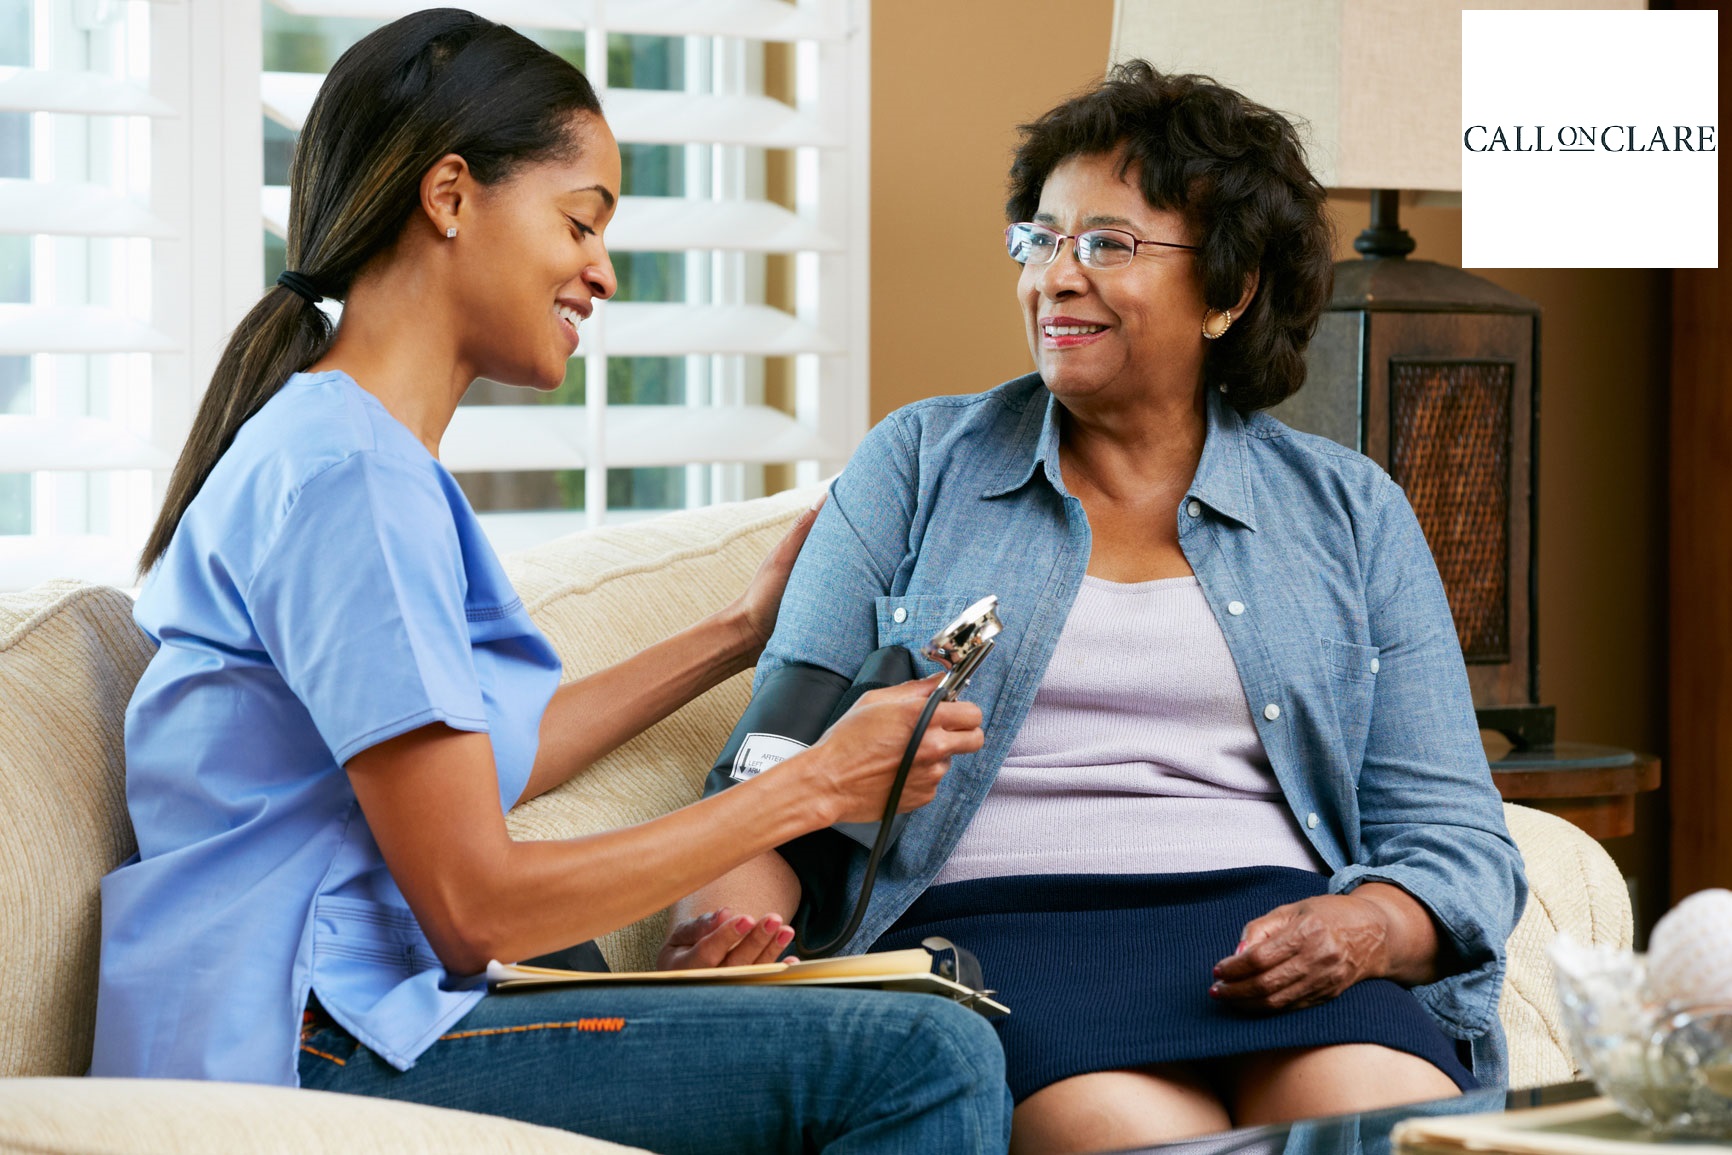 How Can Respite Care Help You Cope With A Difficult Situation?